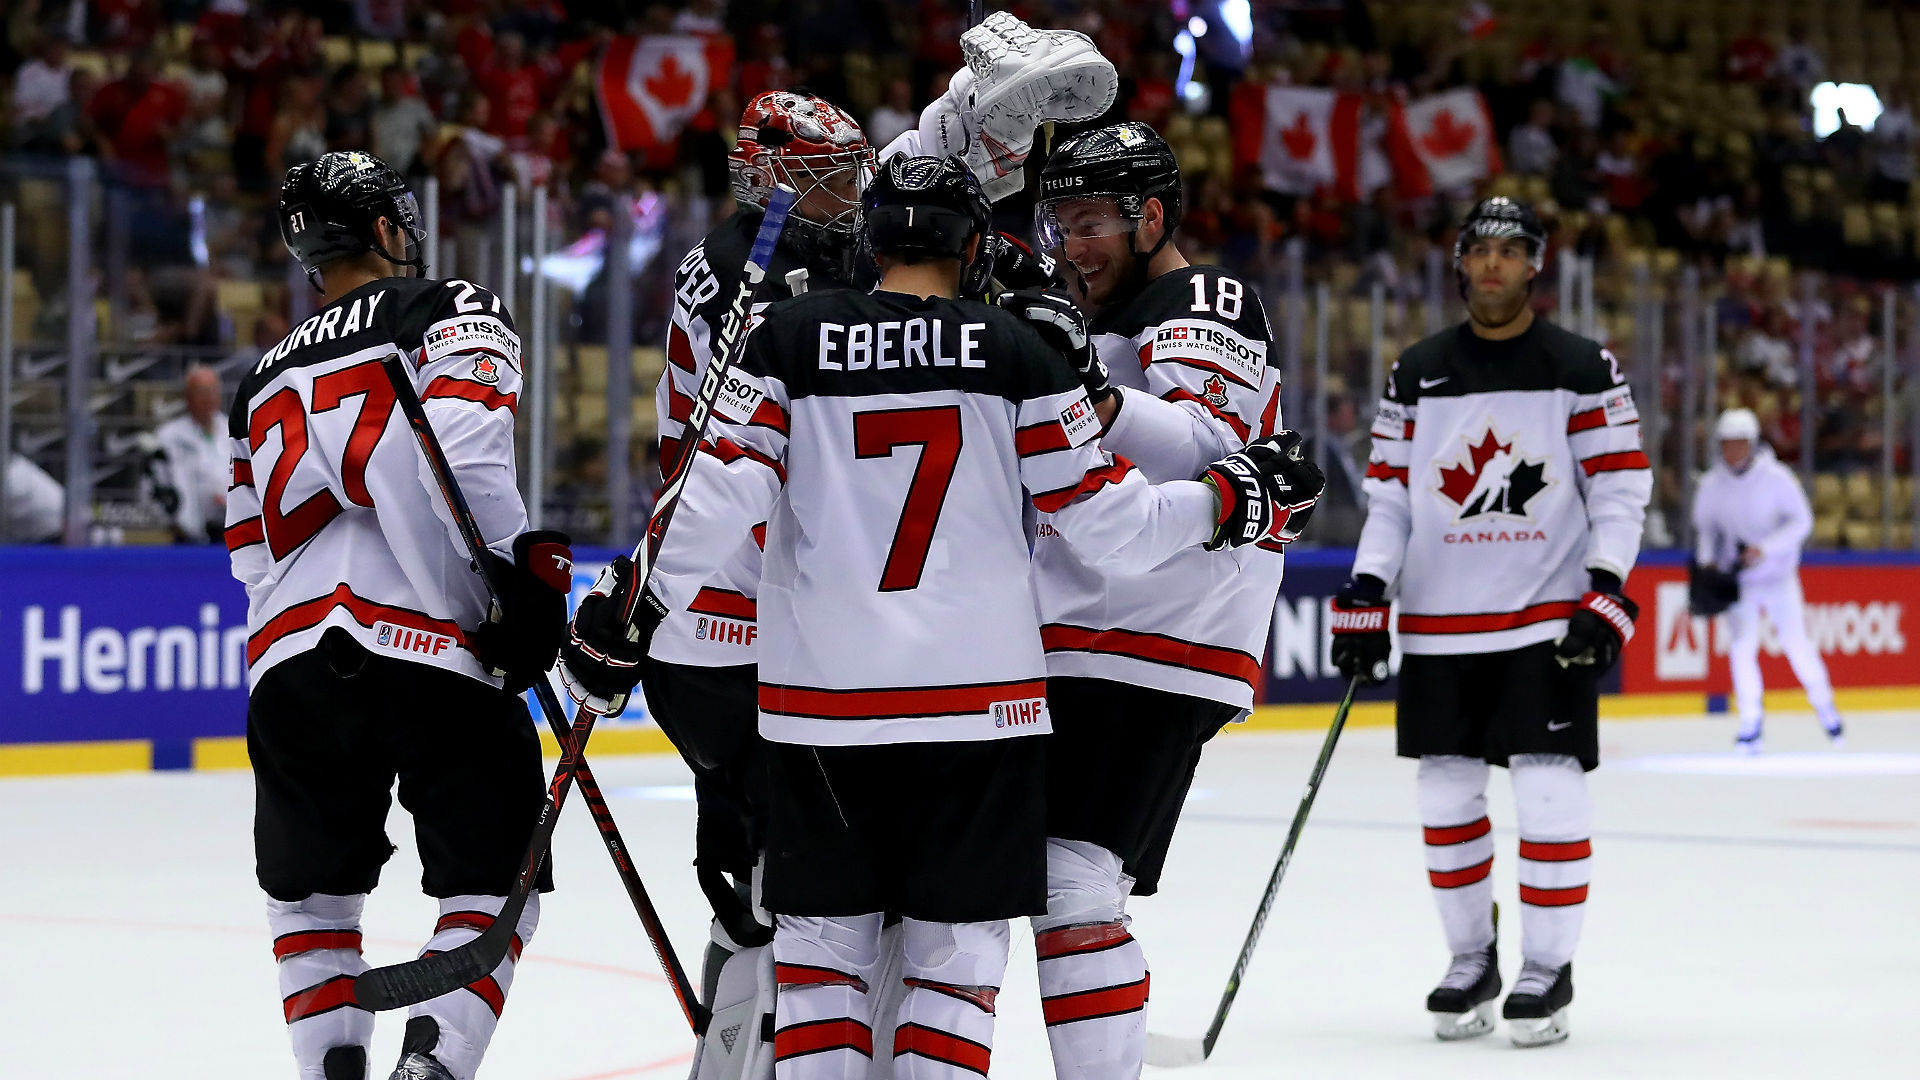 Canada powers past Russia 5-4 in overtime, advances to IIHF World Championship 2018 semifinals